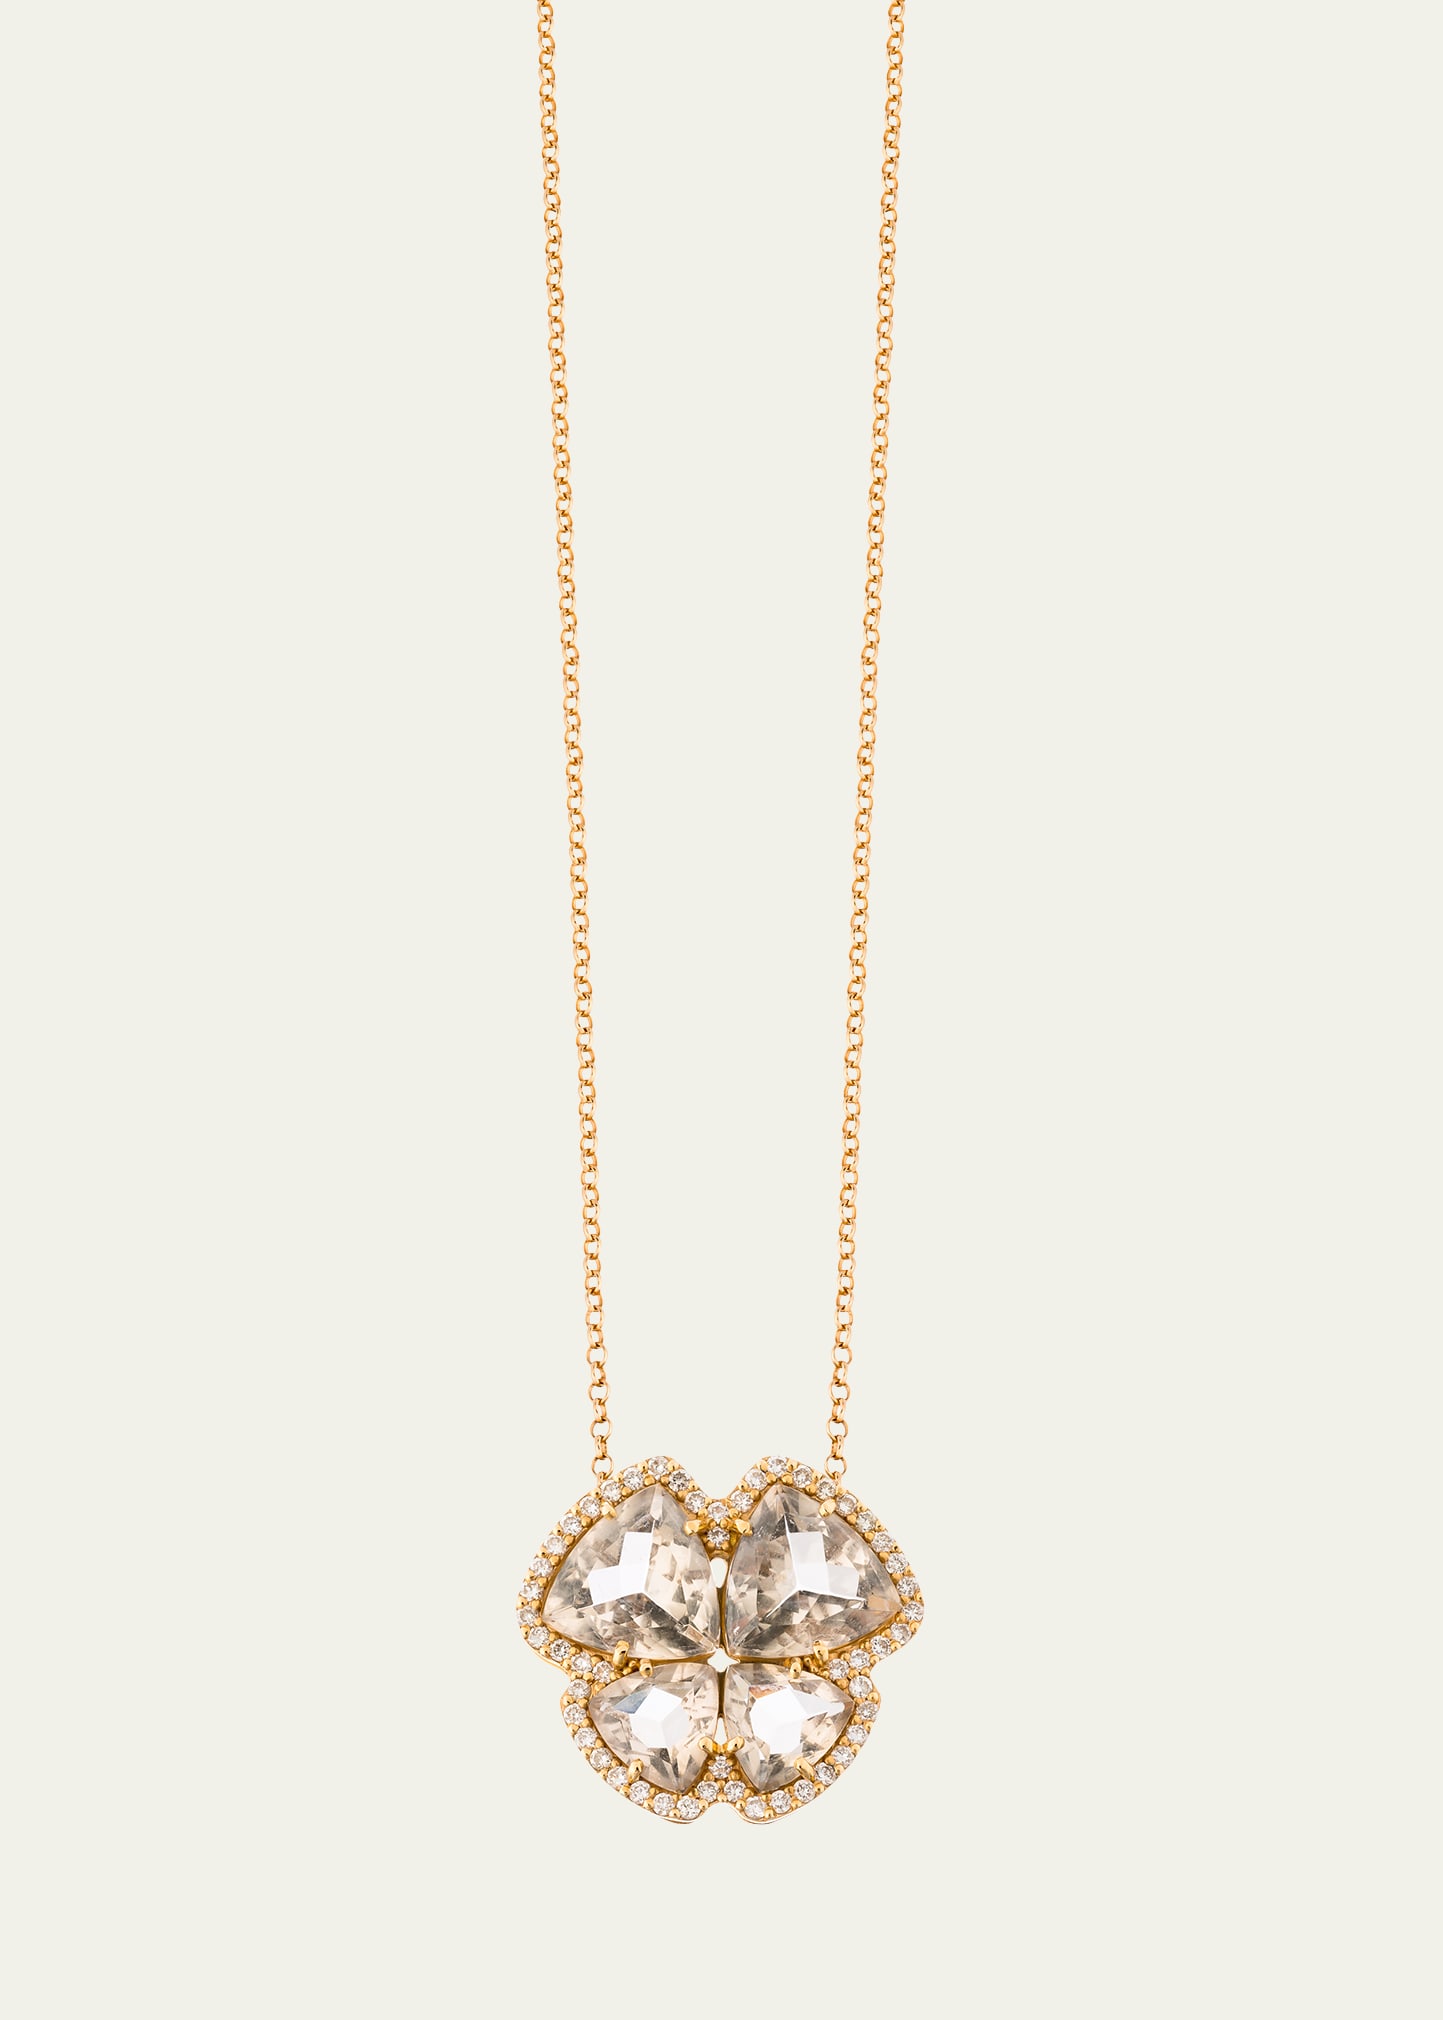 Daniella Kronfle 18k Rose Gold Medium Butterfly Necklace With Smoky Quartz And Diamonds